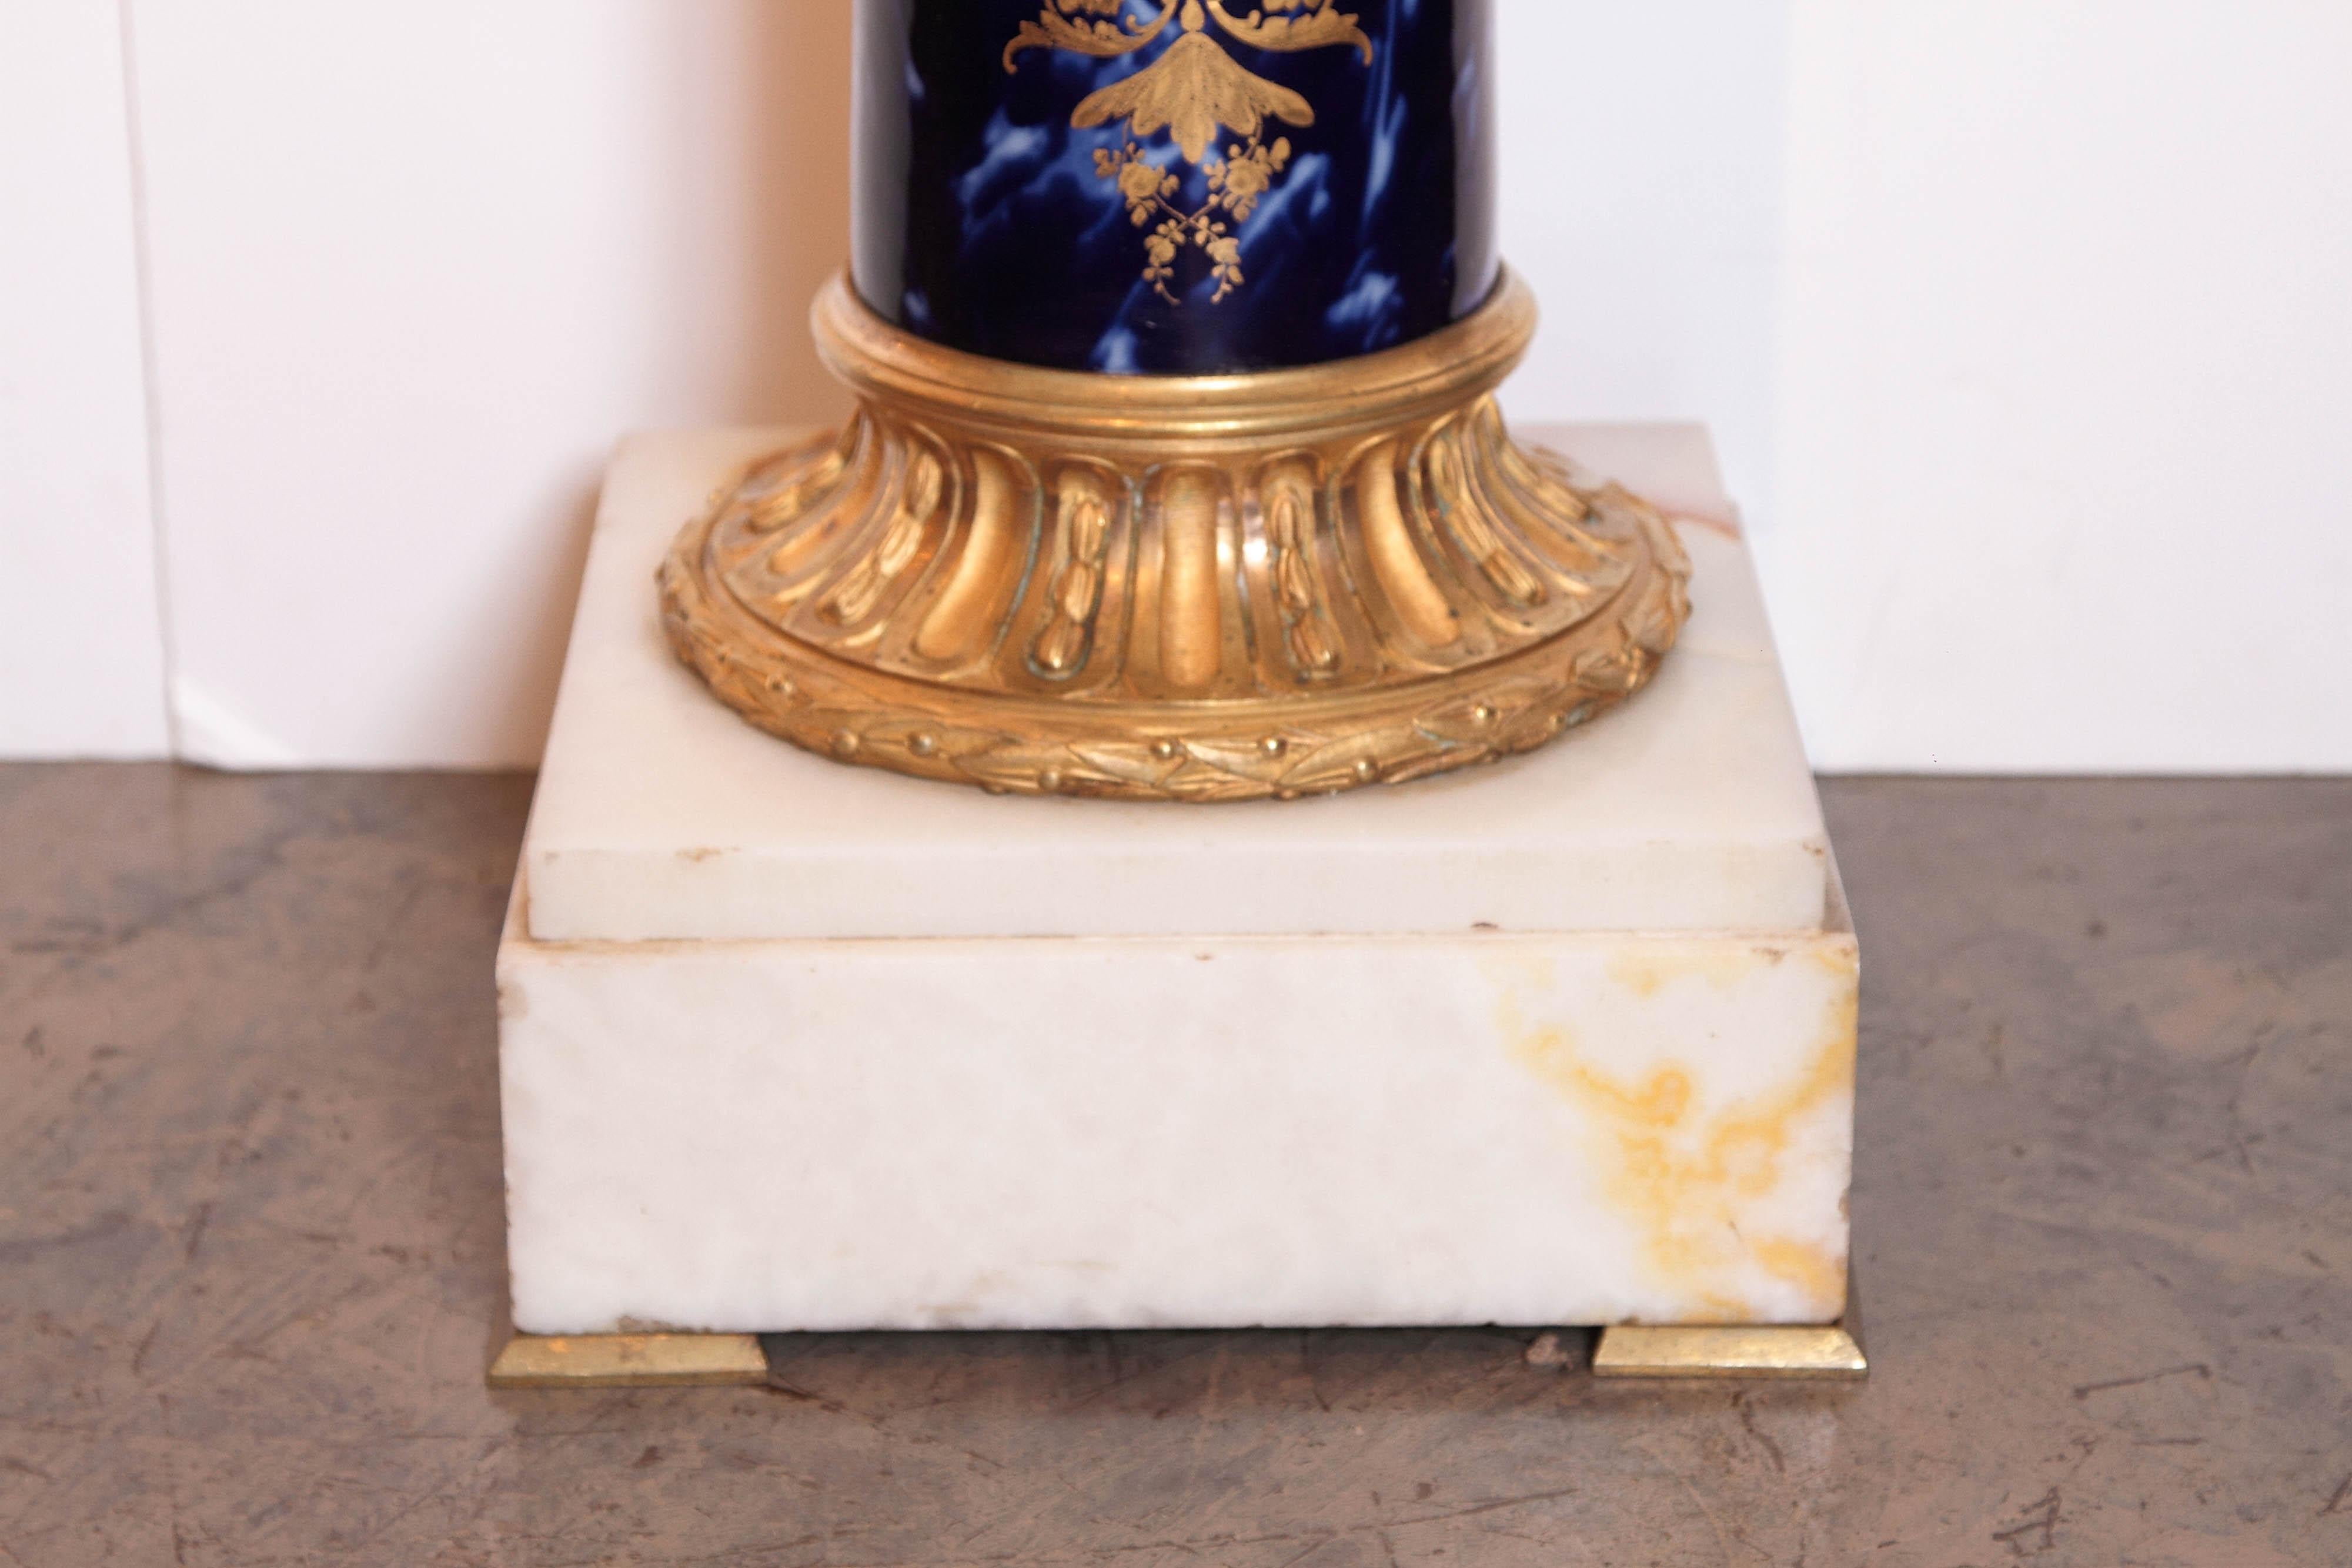 19th Century French Sèvres Porcelain Pedestal In Good Condition For Sale In Dallas, TX